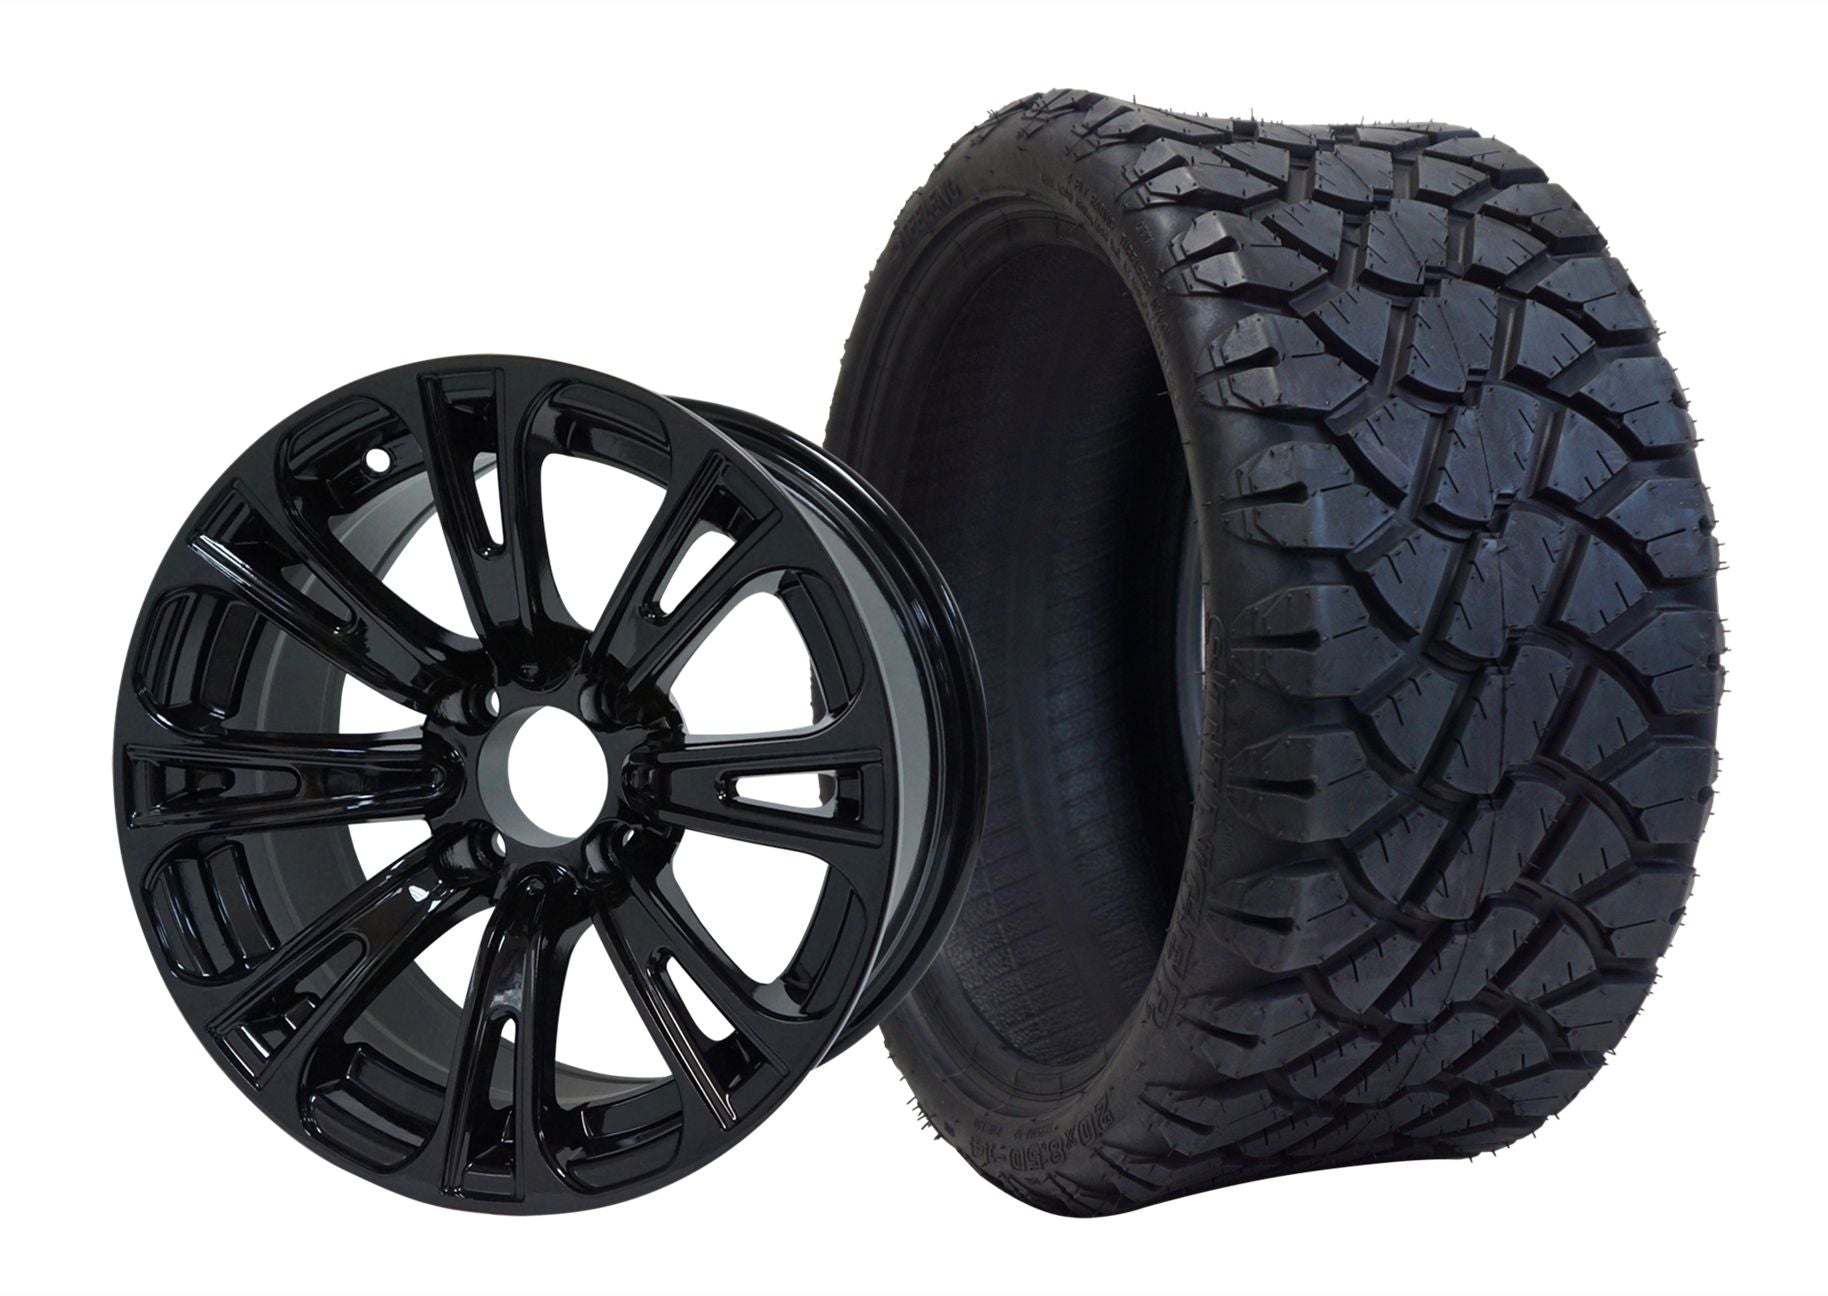 SGC 14" x 7" Voodoo Glossy Black Wheel - Aluminum Alloy STEELENG 20"x8.5"-14" STINGER AT Tire DOT approved WH1421-TR1402